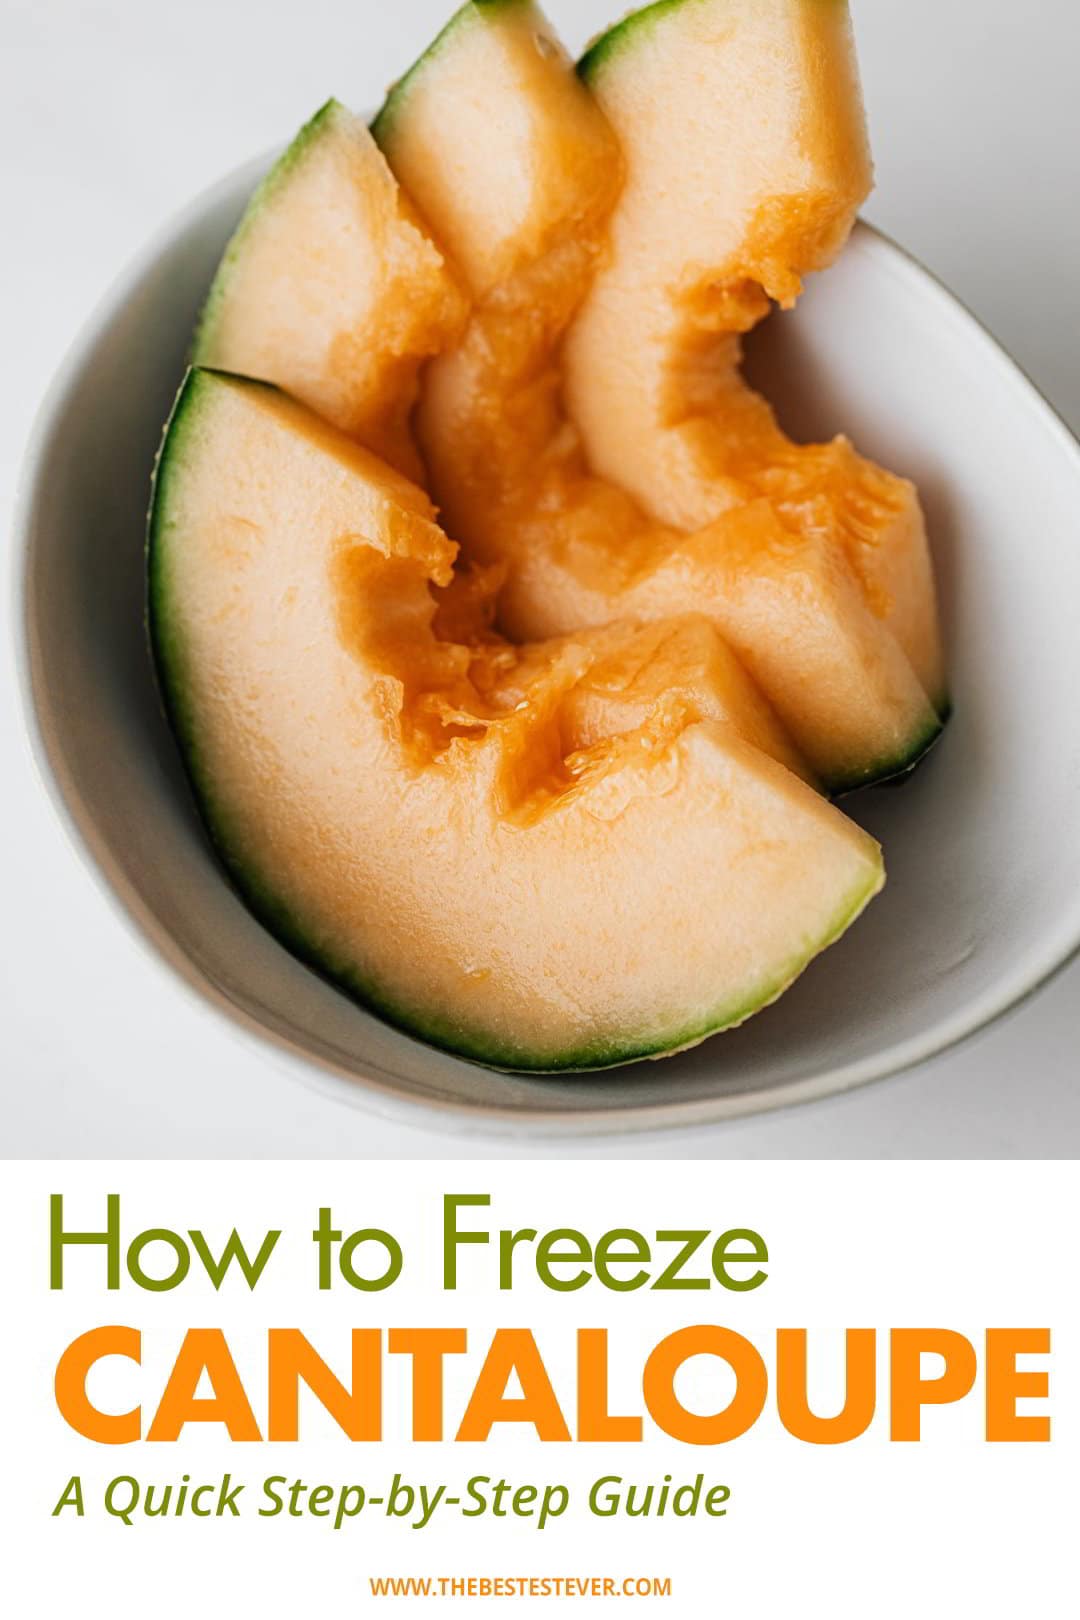 How to Freeze Cantaloupe: A Step-by-Step Instructional Guide